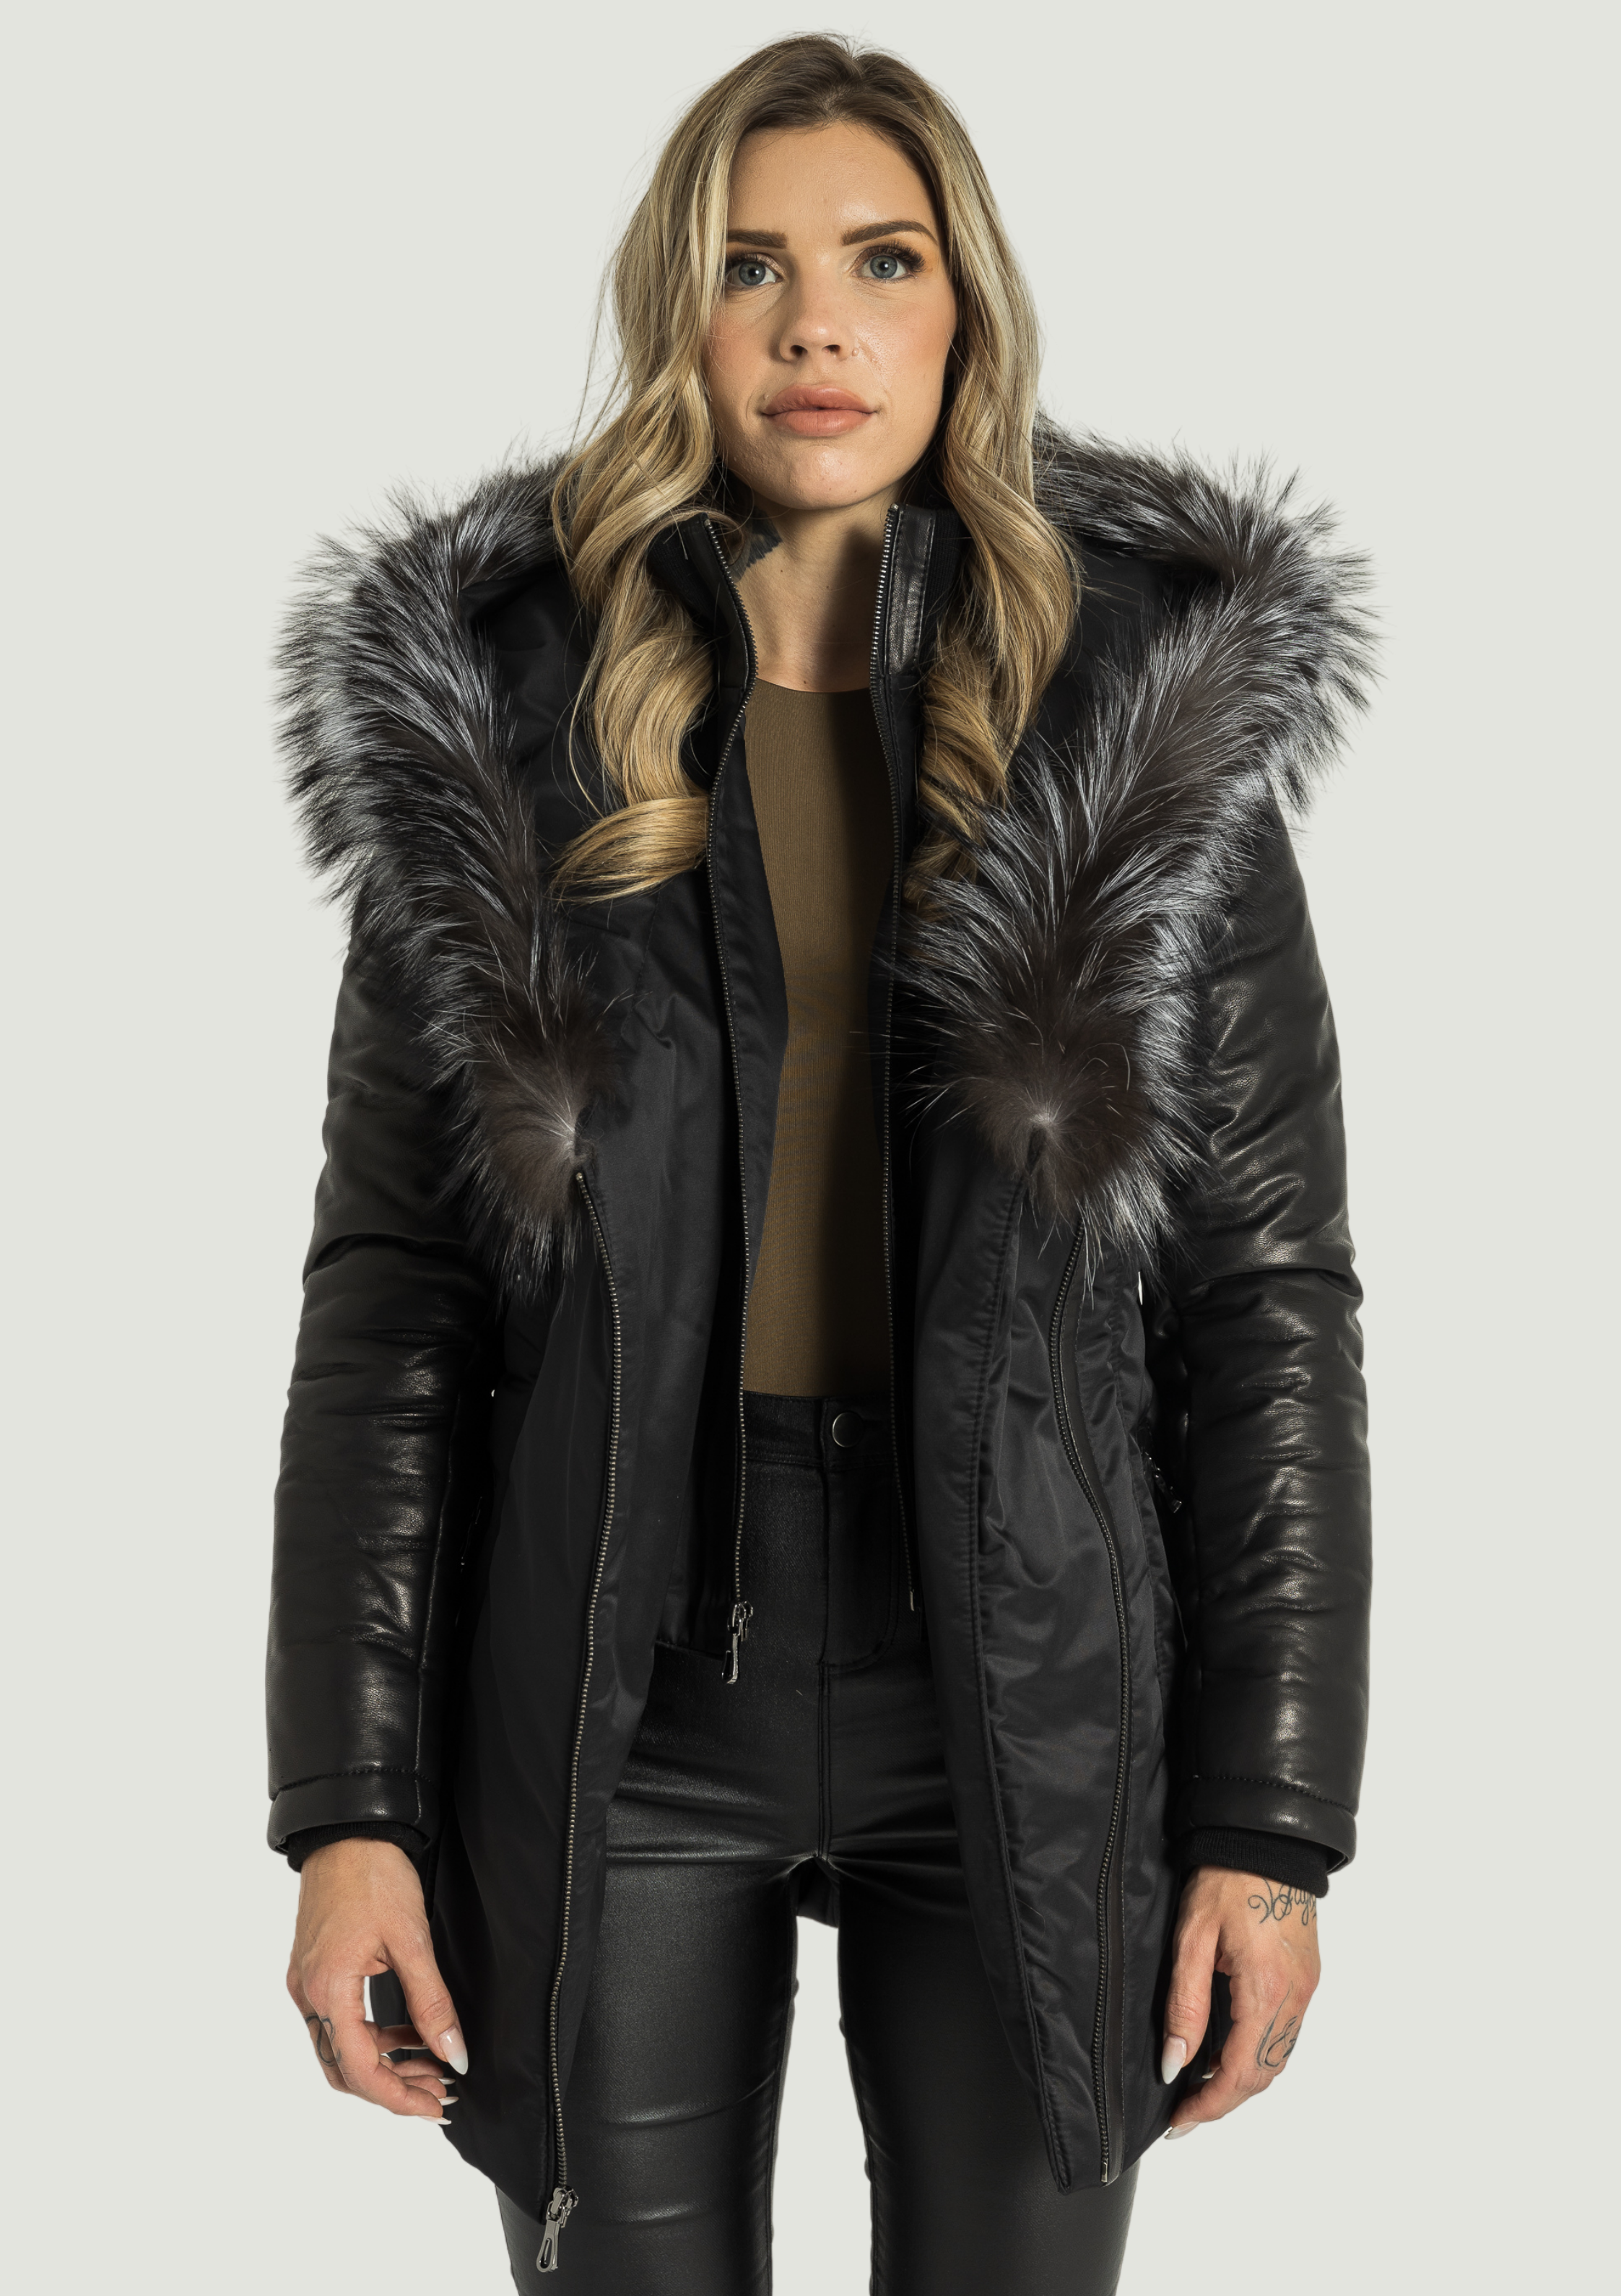 MELANIA Puffer Jacket With Leather Sleeves